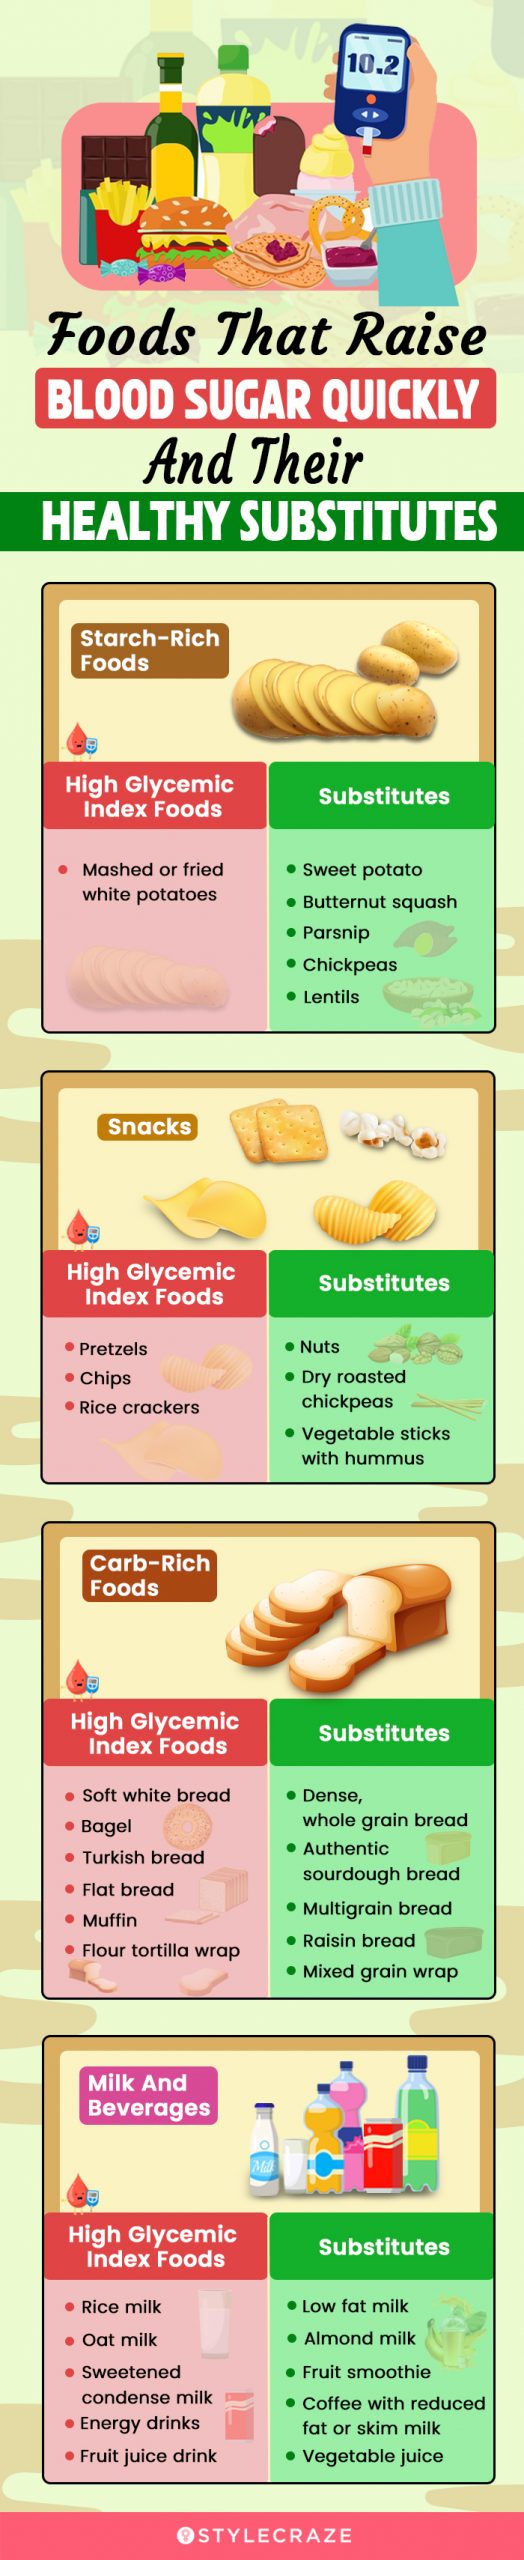 foods that raise blood sugar quickly and their healthy substitutes [infographic]